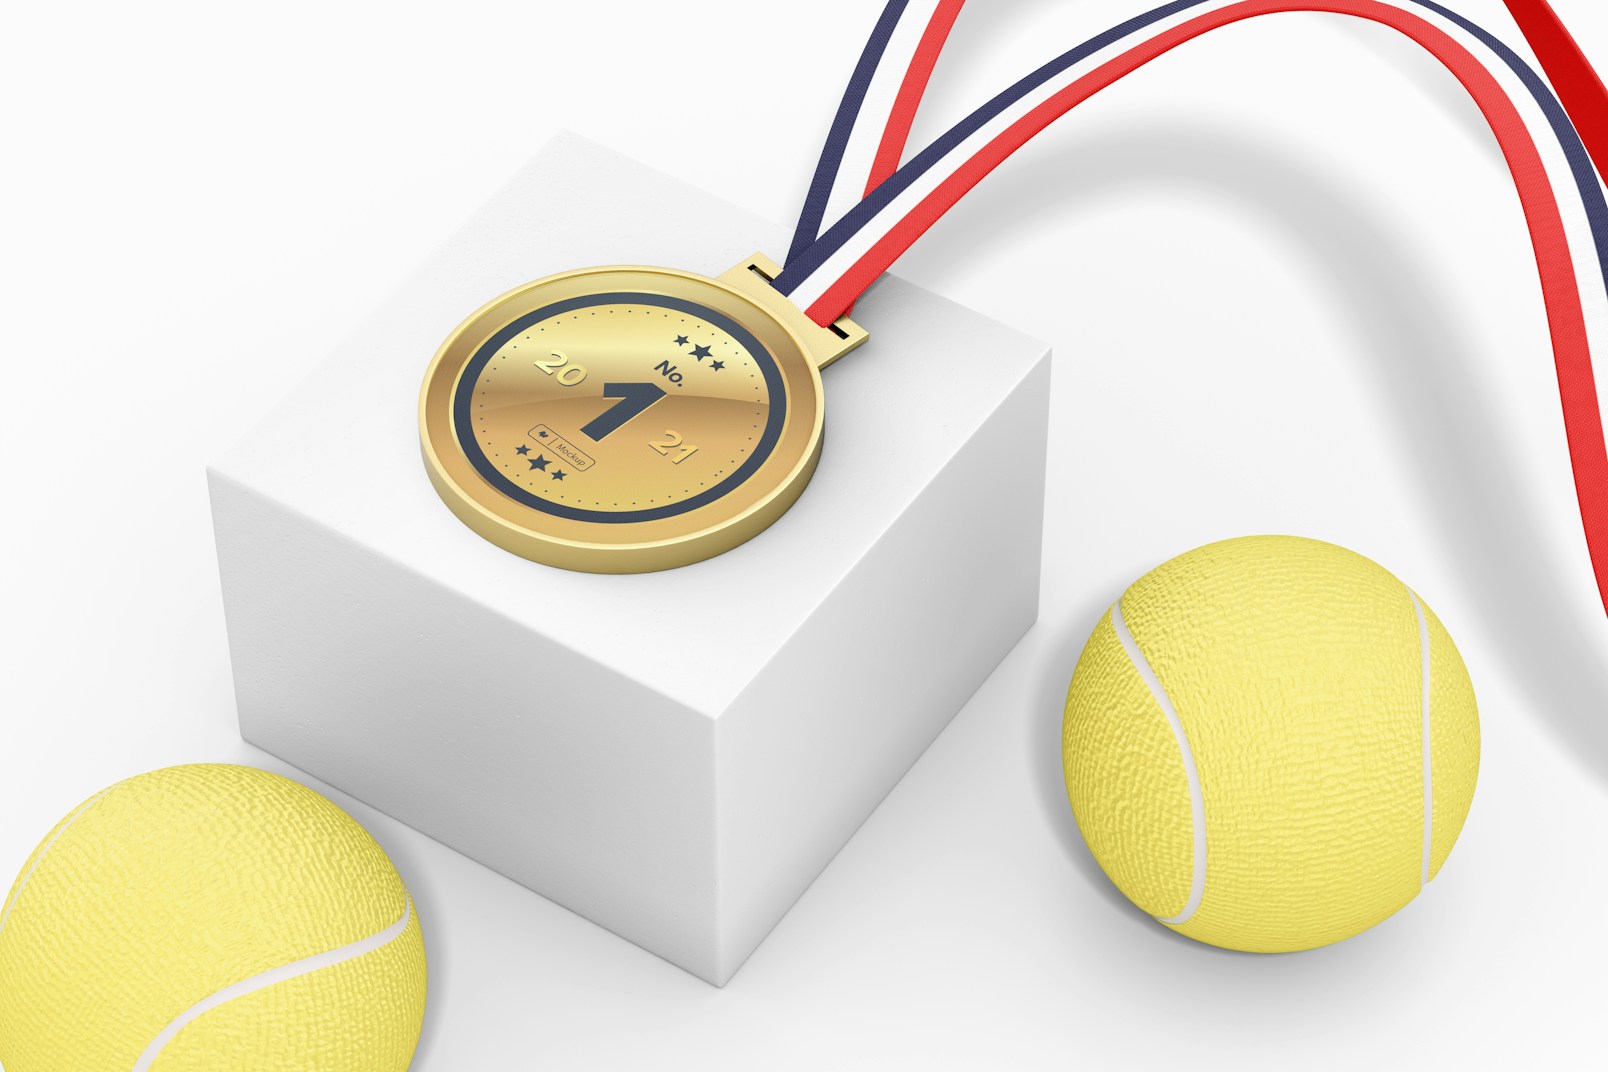 Round Competition Medal with Ribbon Mockup, Close Up